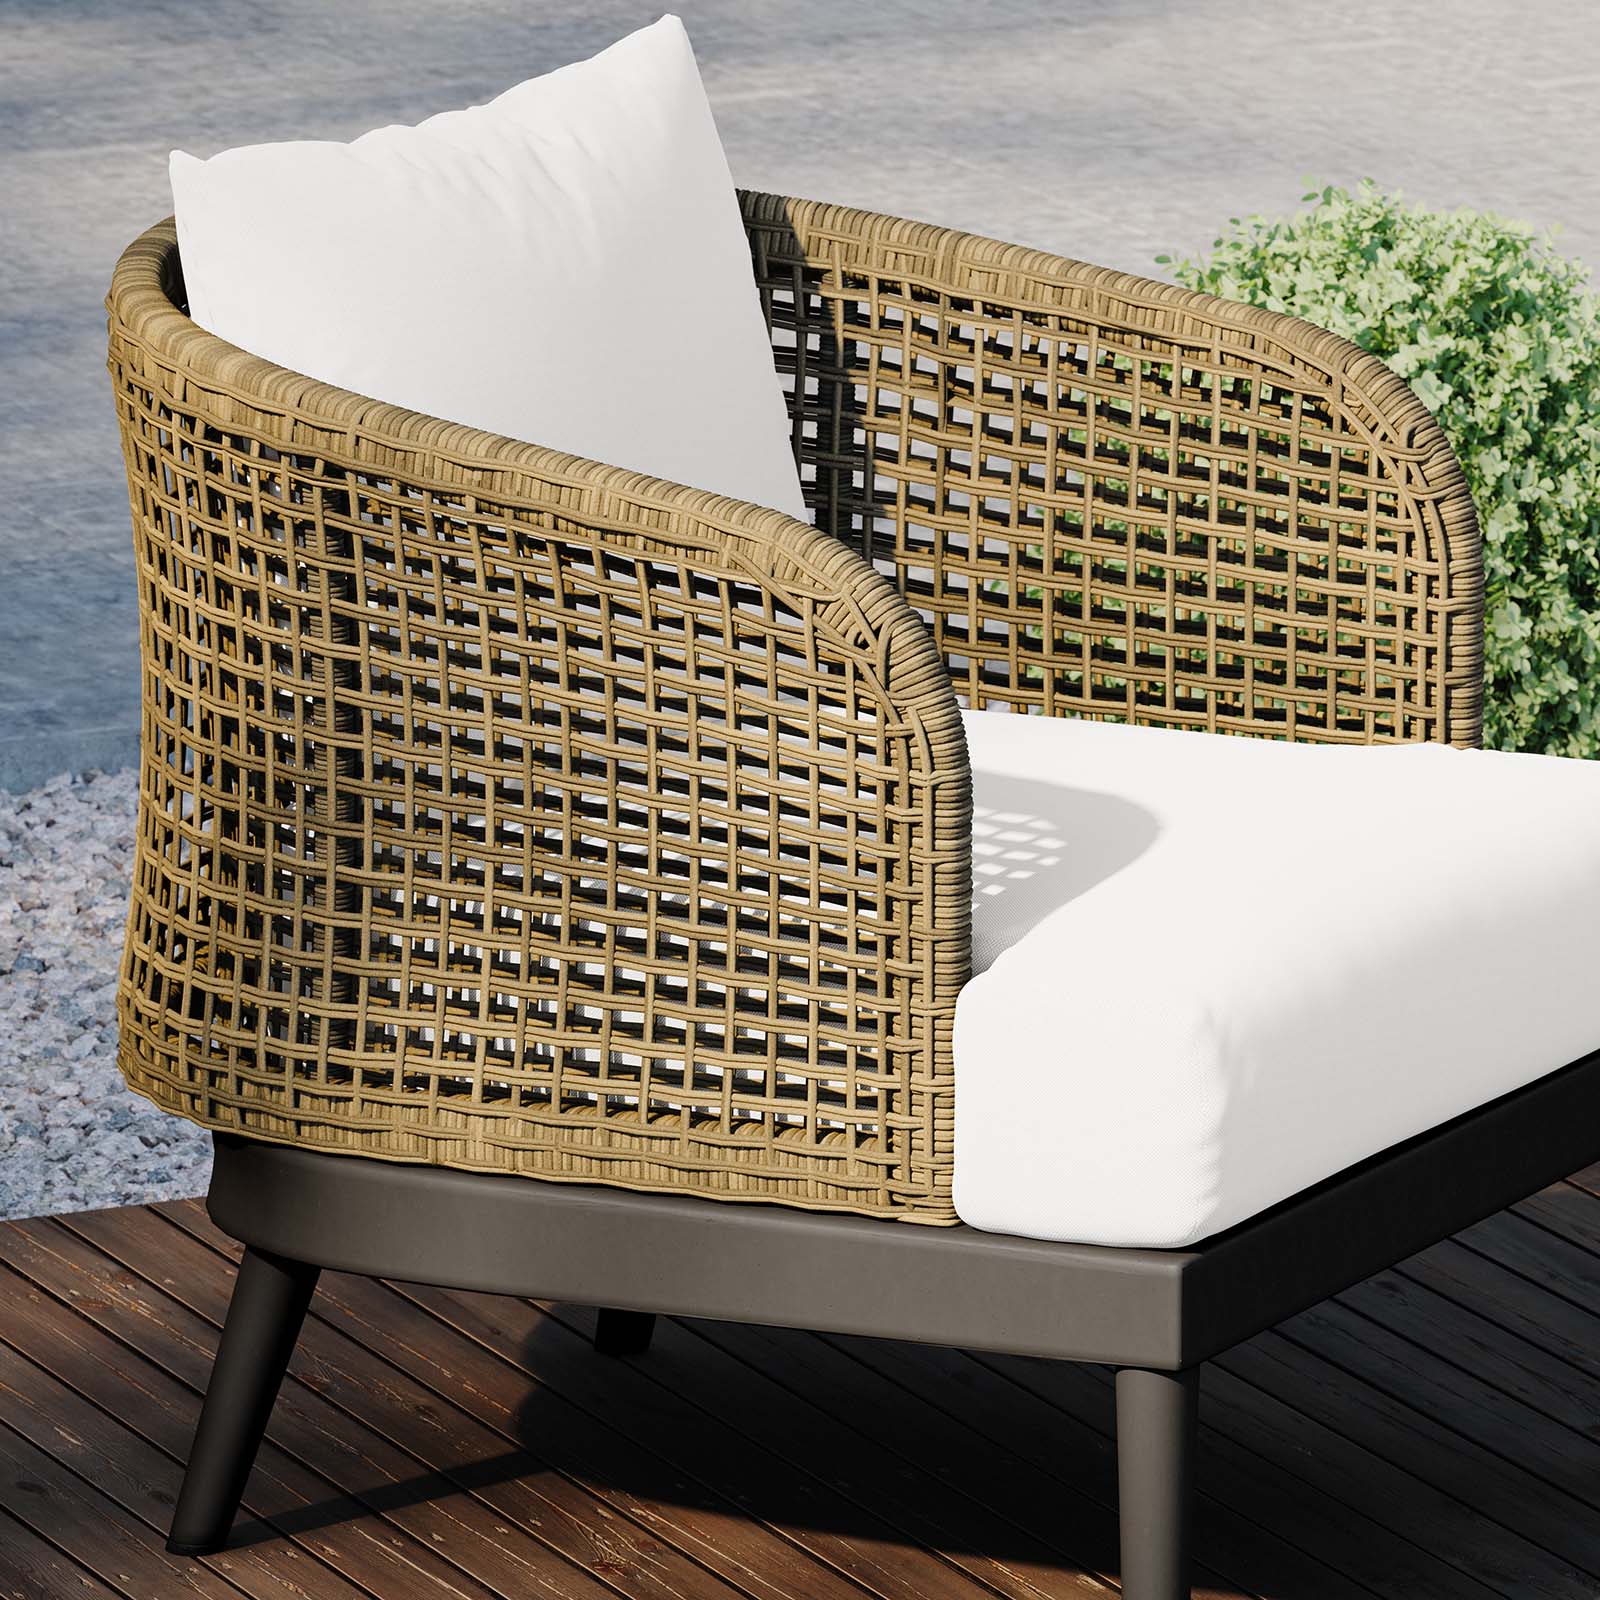 Meadow Outdoor Patio Armchair - East Shore Modern Home Furnishings